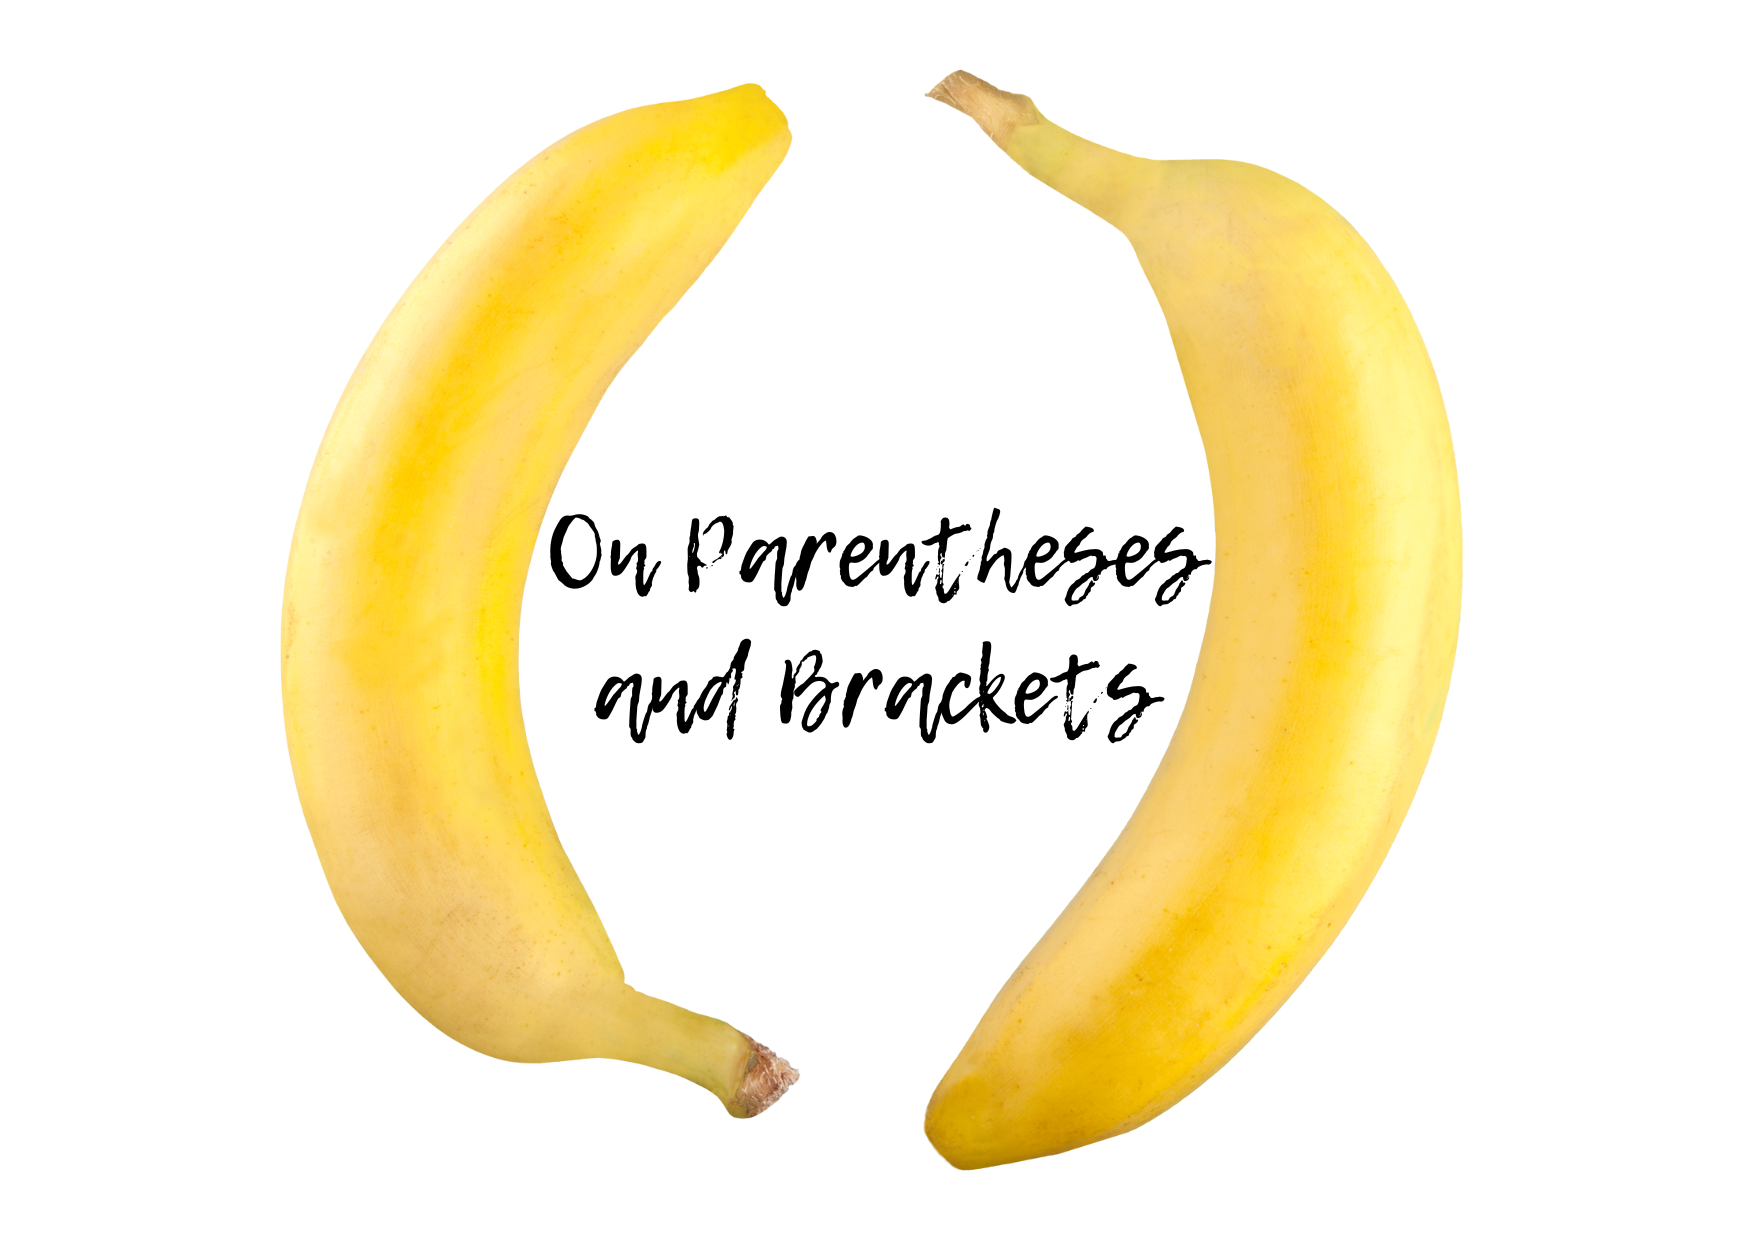 A picture of two bananas positioned like parentheses with the words "on parentheses and brackets" between them